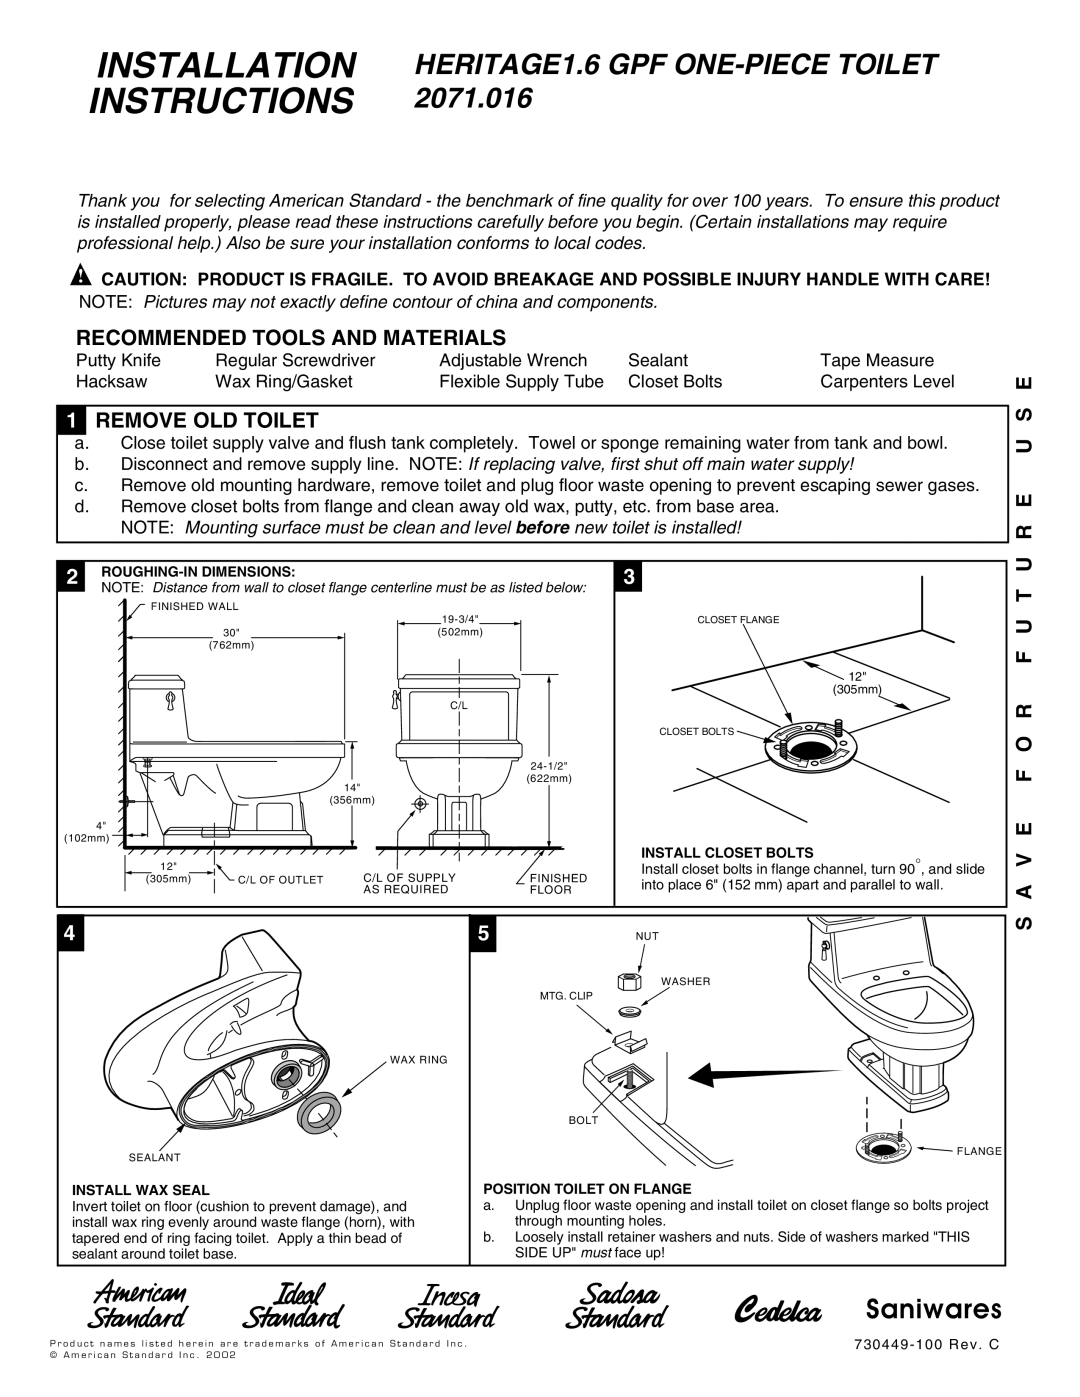 American Standard 2071.016 installation instructions Recommended Tools And Materials, 1REMOVE OLD TOILET, U R E U S E 